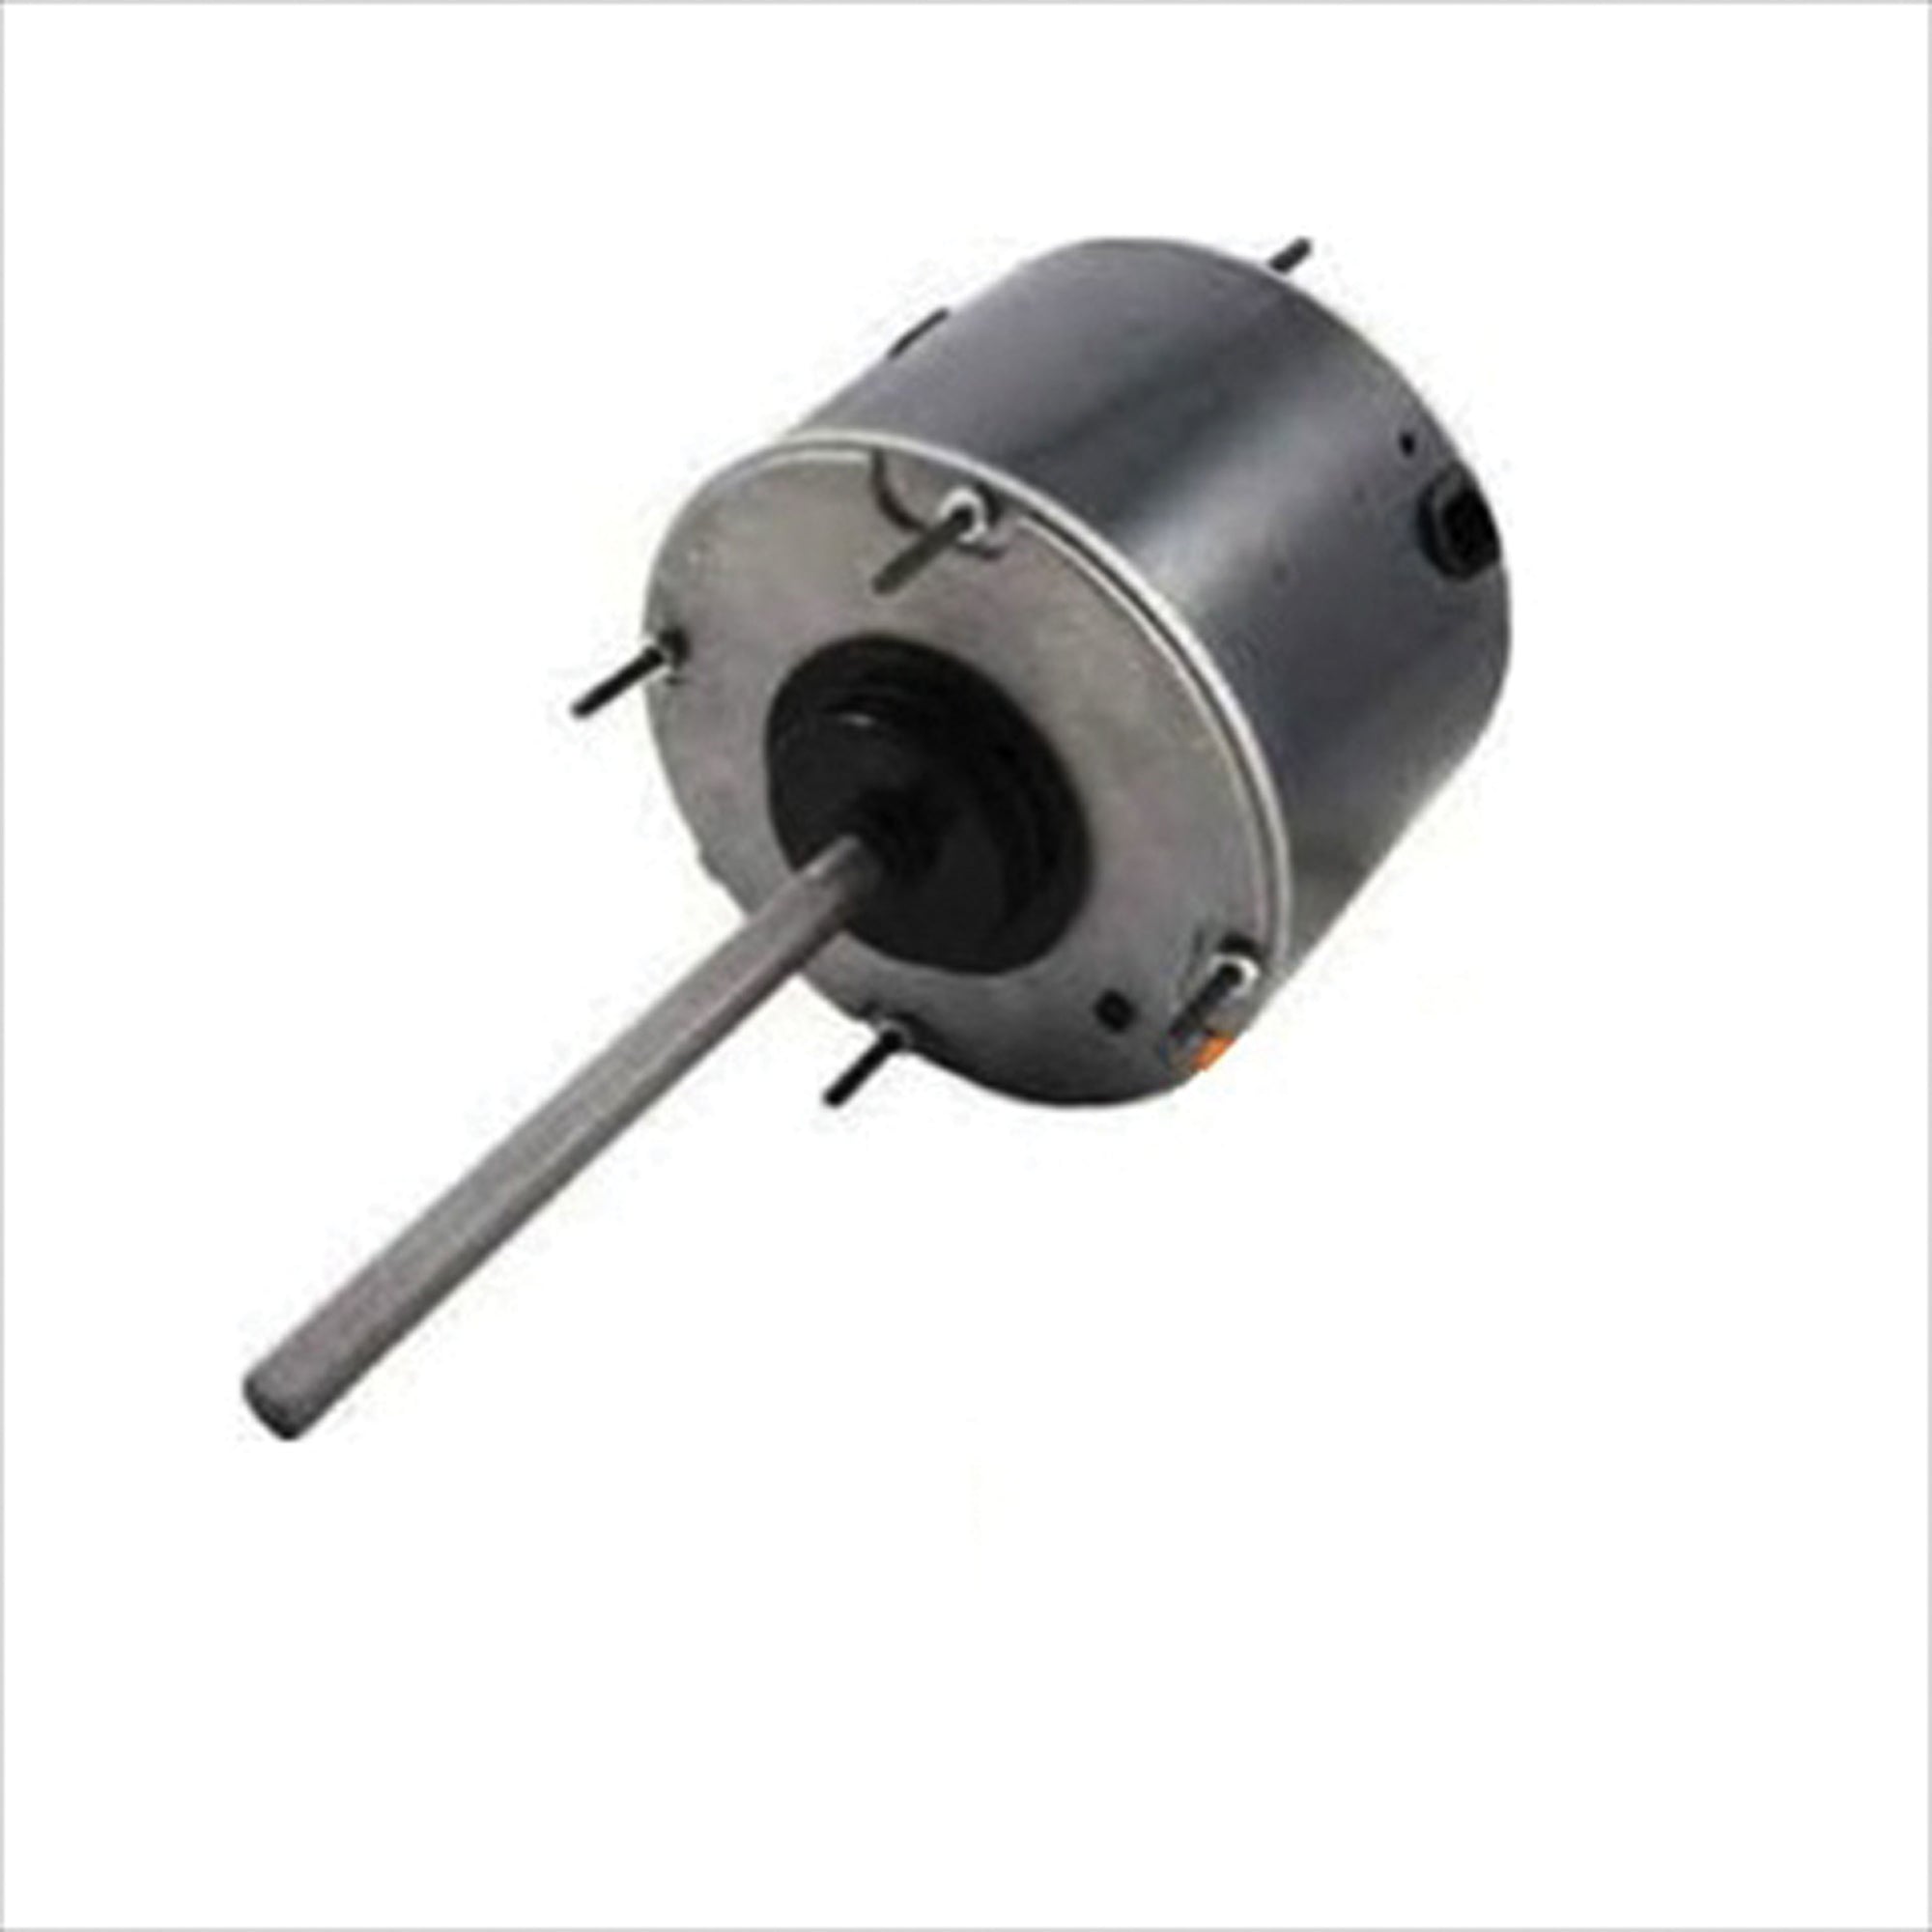 Atwood 15054 Air Command Fan Condenser Motor